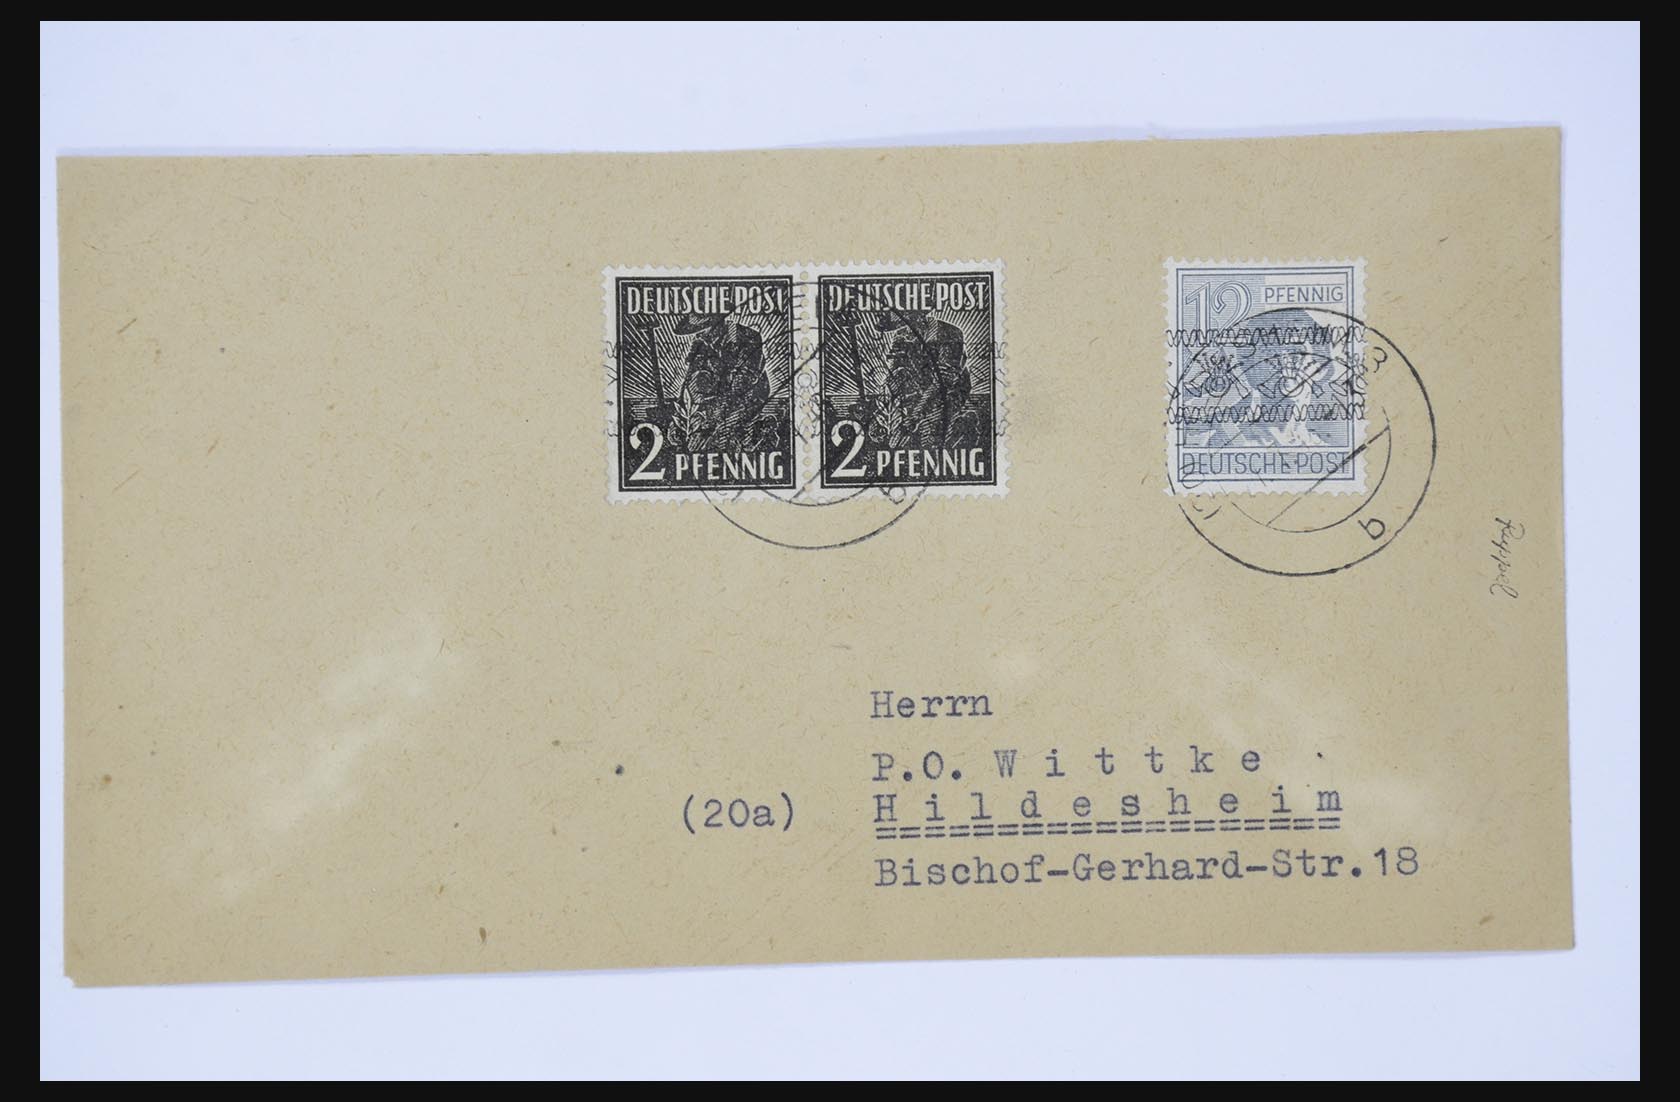 31581 049 - 31581 Germany covers and FDC's 1945-1981.